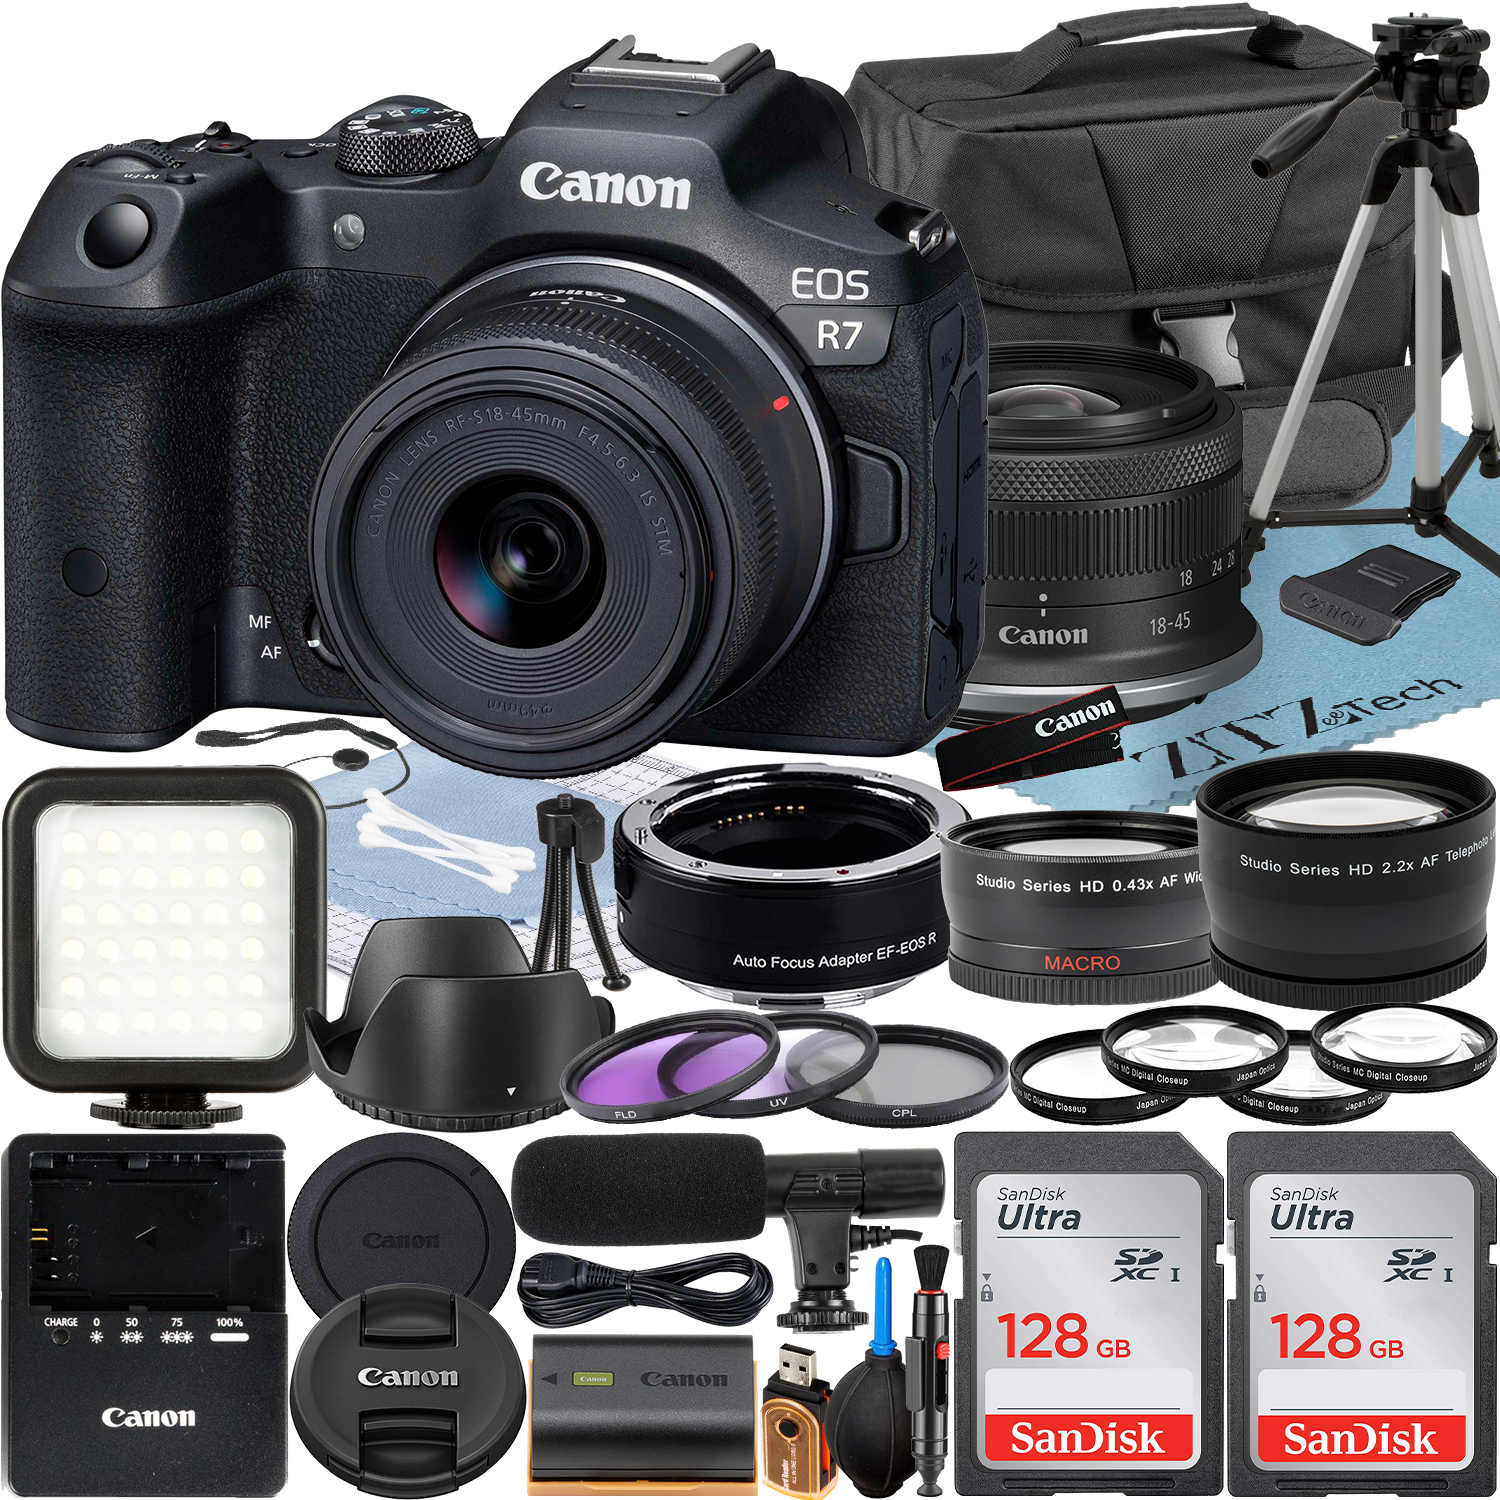 Canon EOS R7 Mirrorless Camera with RF-S 18-45mm Lens + Mount Adapter + 2 Pack SanDisk 128GB Memory Card + Case + ZeeTech Accessory